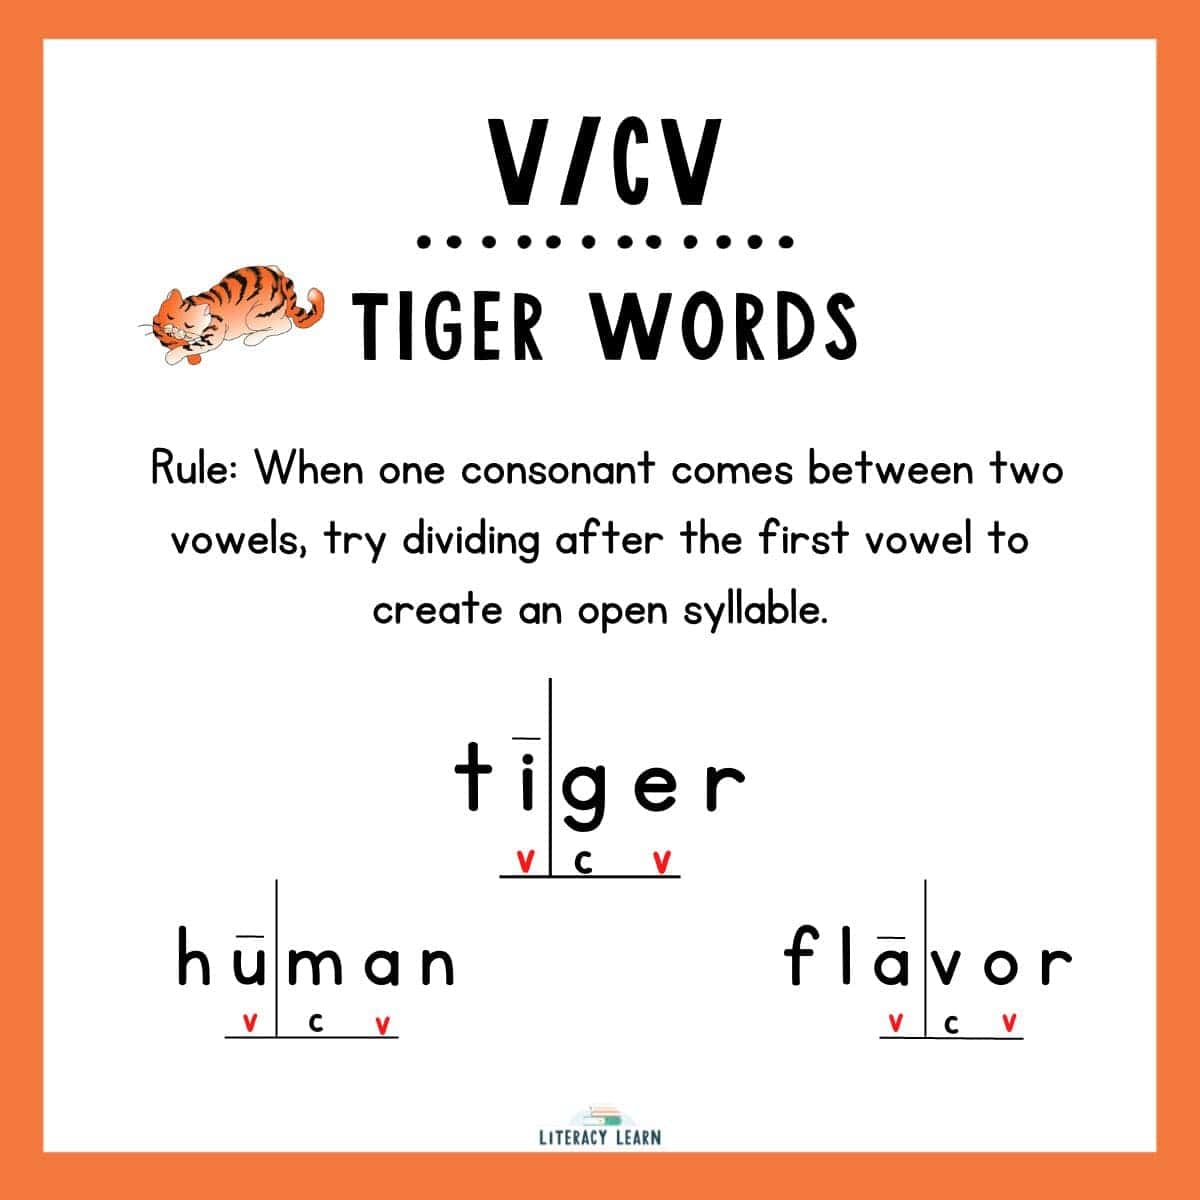 Orange graphic focused on VC/V Tiger Words with rule and example words divided into syllables.